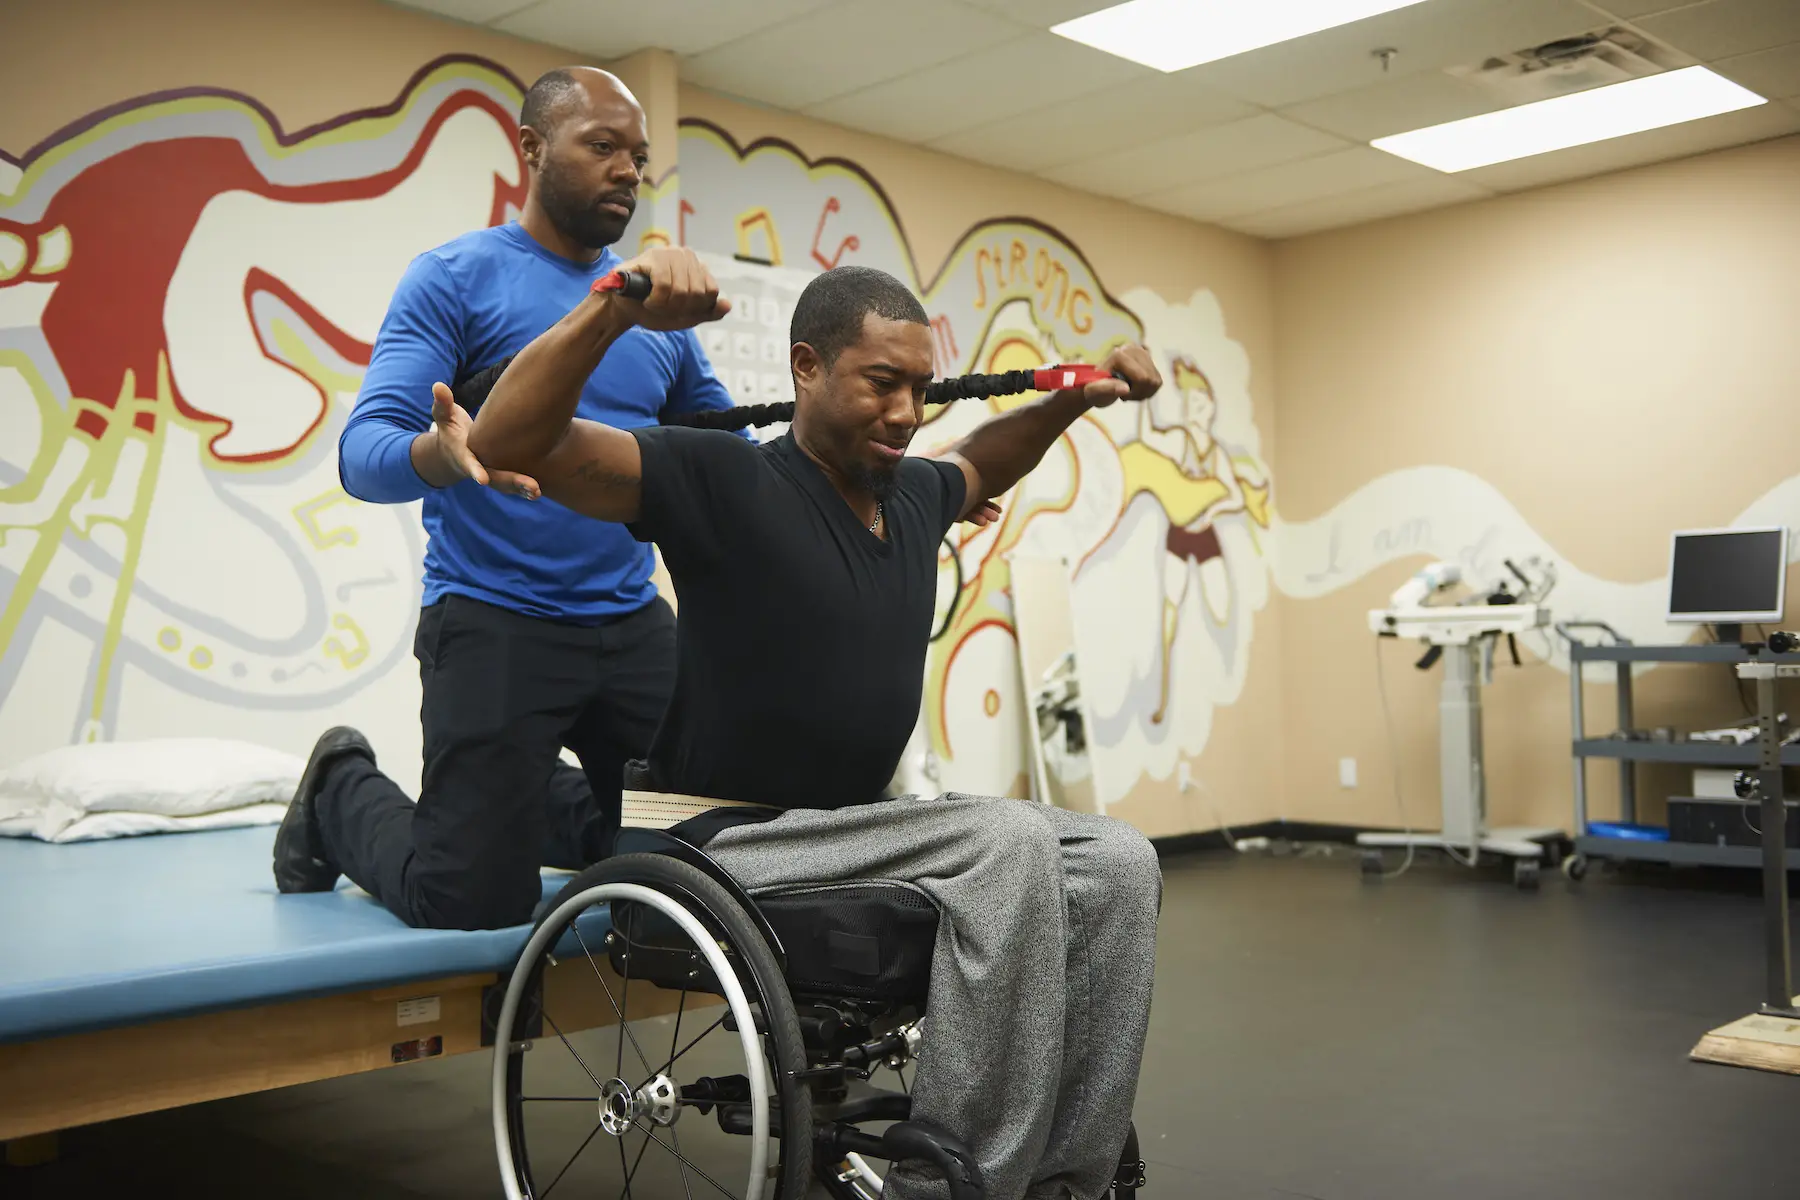 A physical therapist sits behind a man in a wheelchair, helping him strengthen his arms with a resistance band